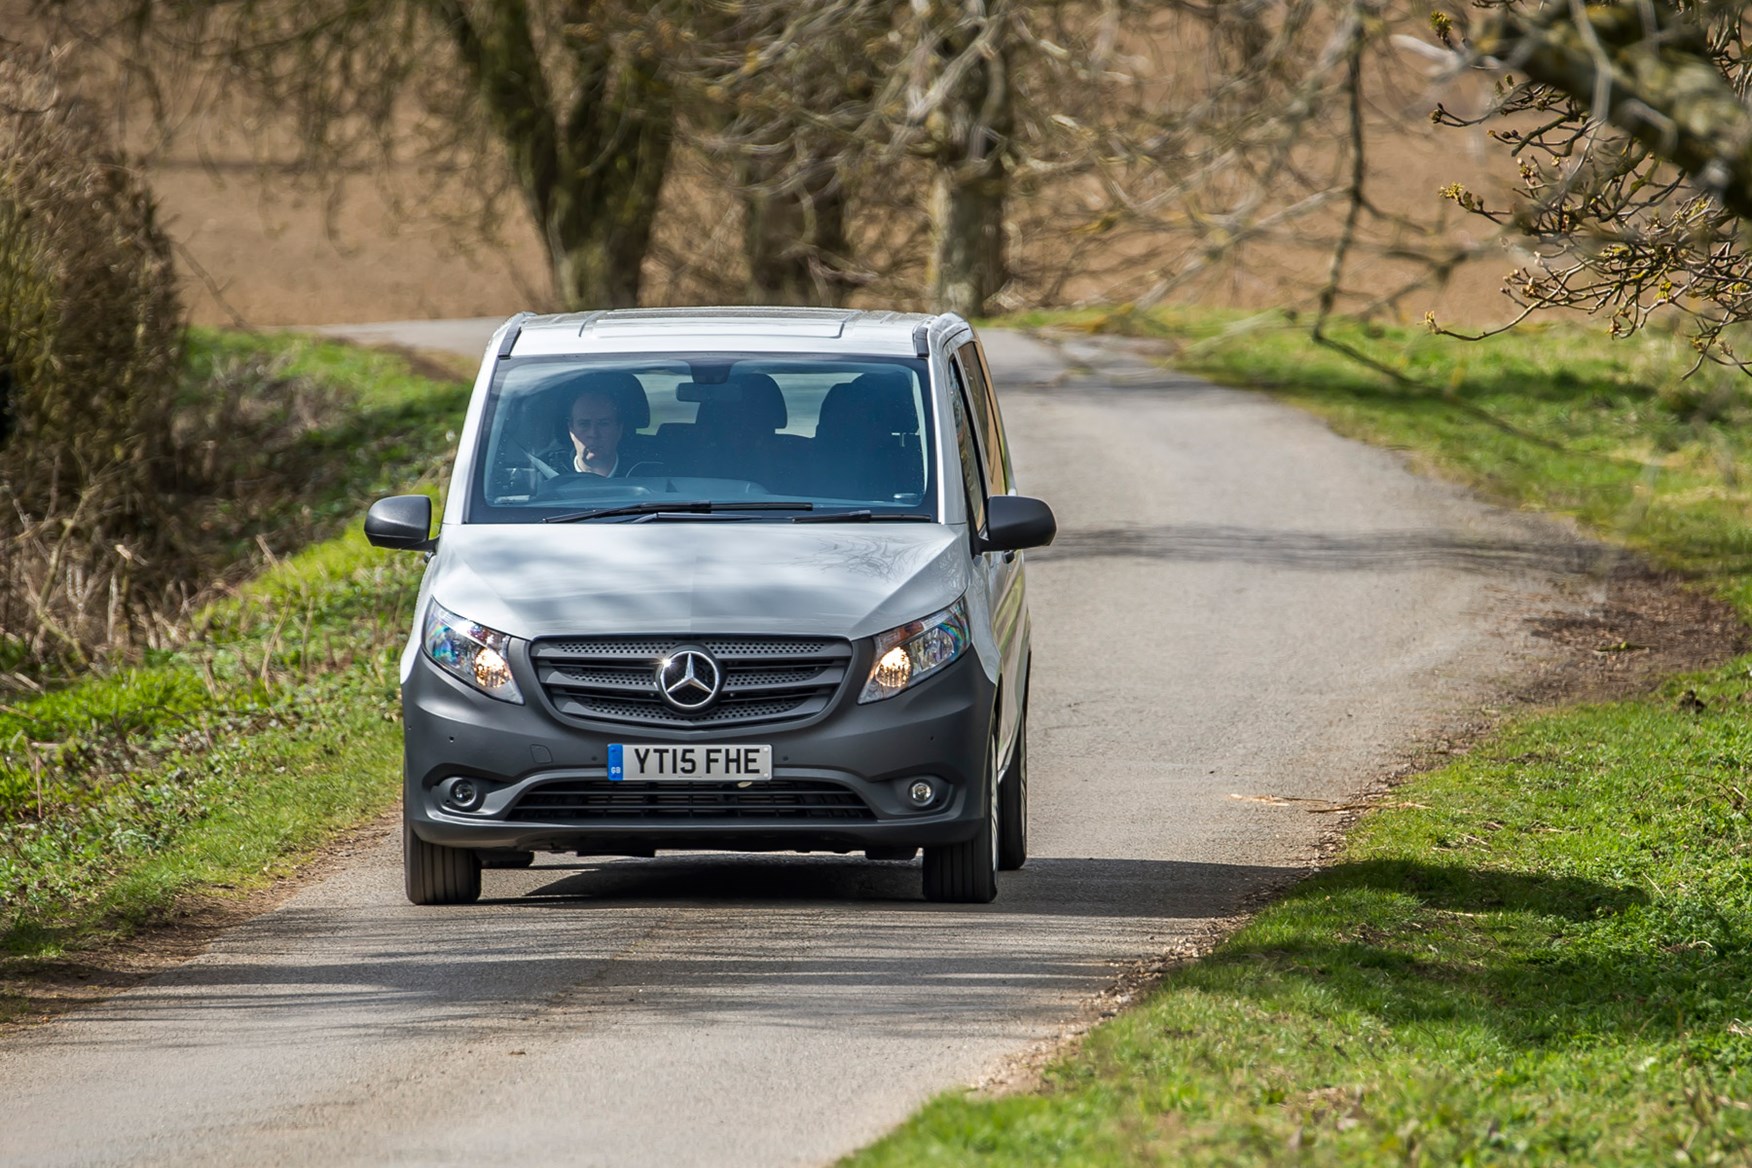 Mercedes-Benz Vito full review on Parkers Vans - on the road